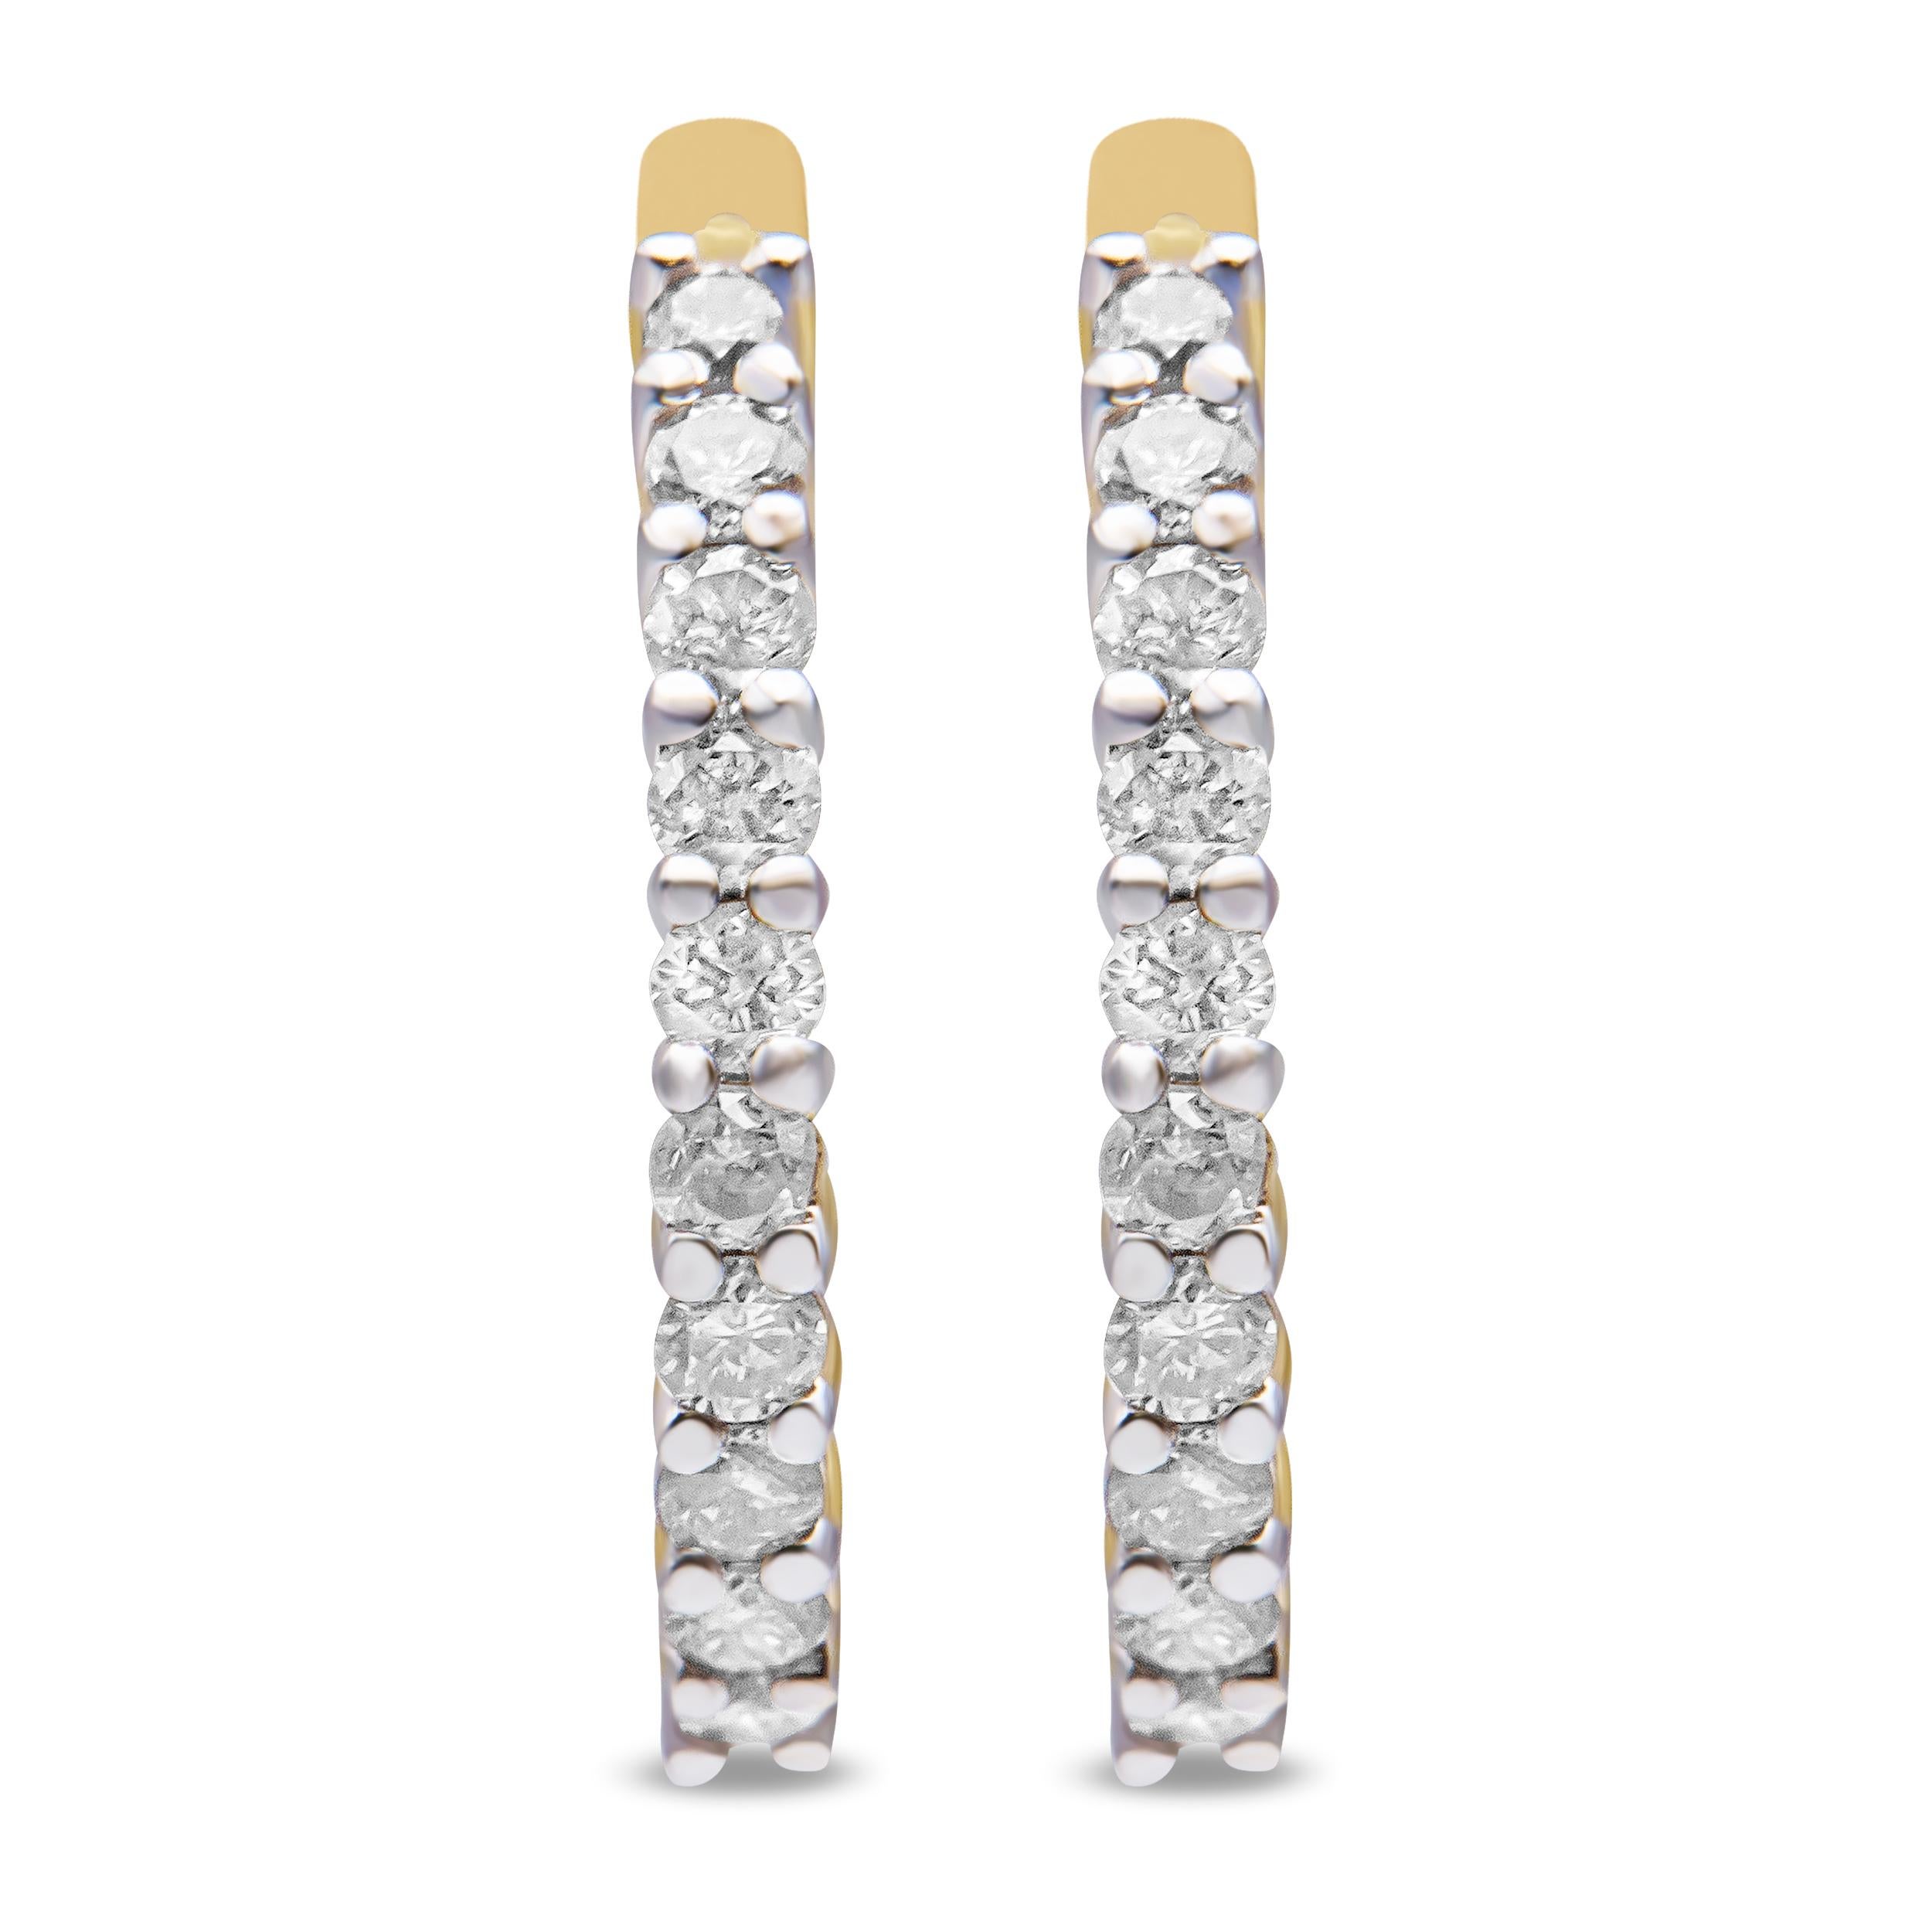 A modern take on a classic hoop design, these earrings sparkle with a total diamond weight of 1/2 c.t. This piece is crafted with beautiful 10k yellow gold, a metal that will stay tarnish free for years to come! The earrings are embellished with